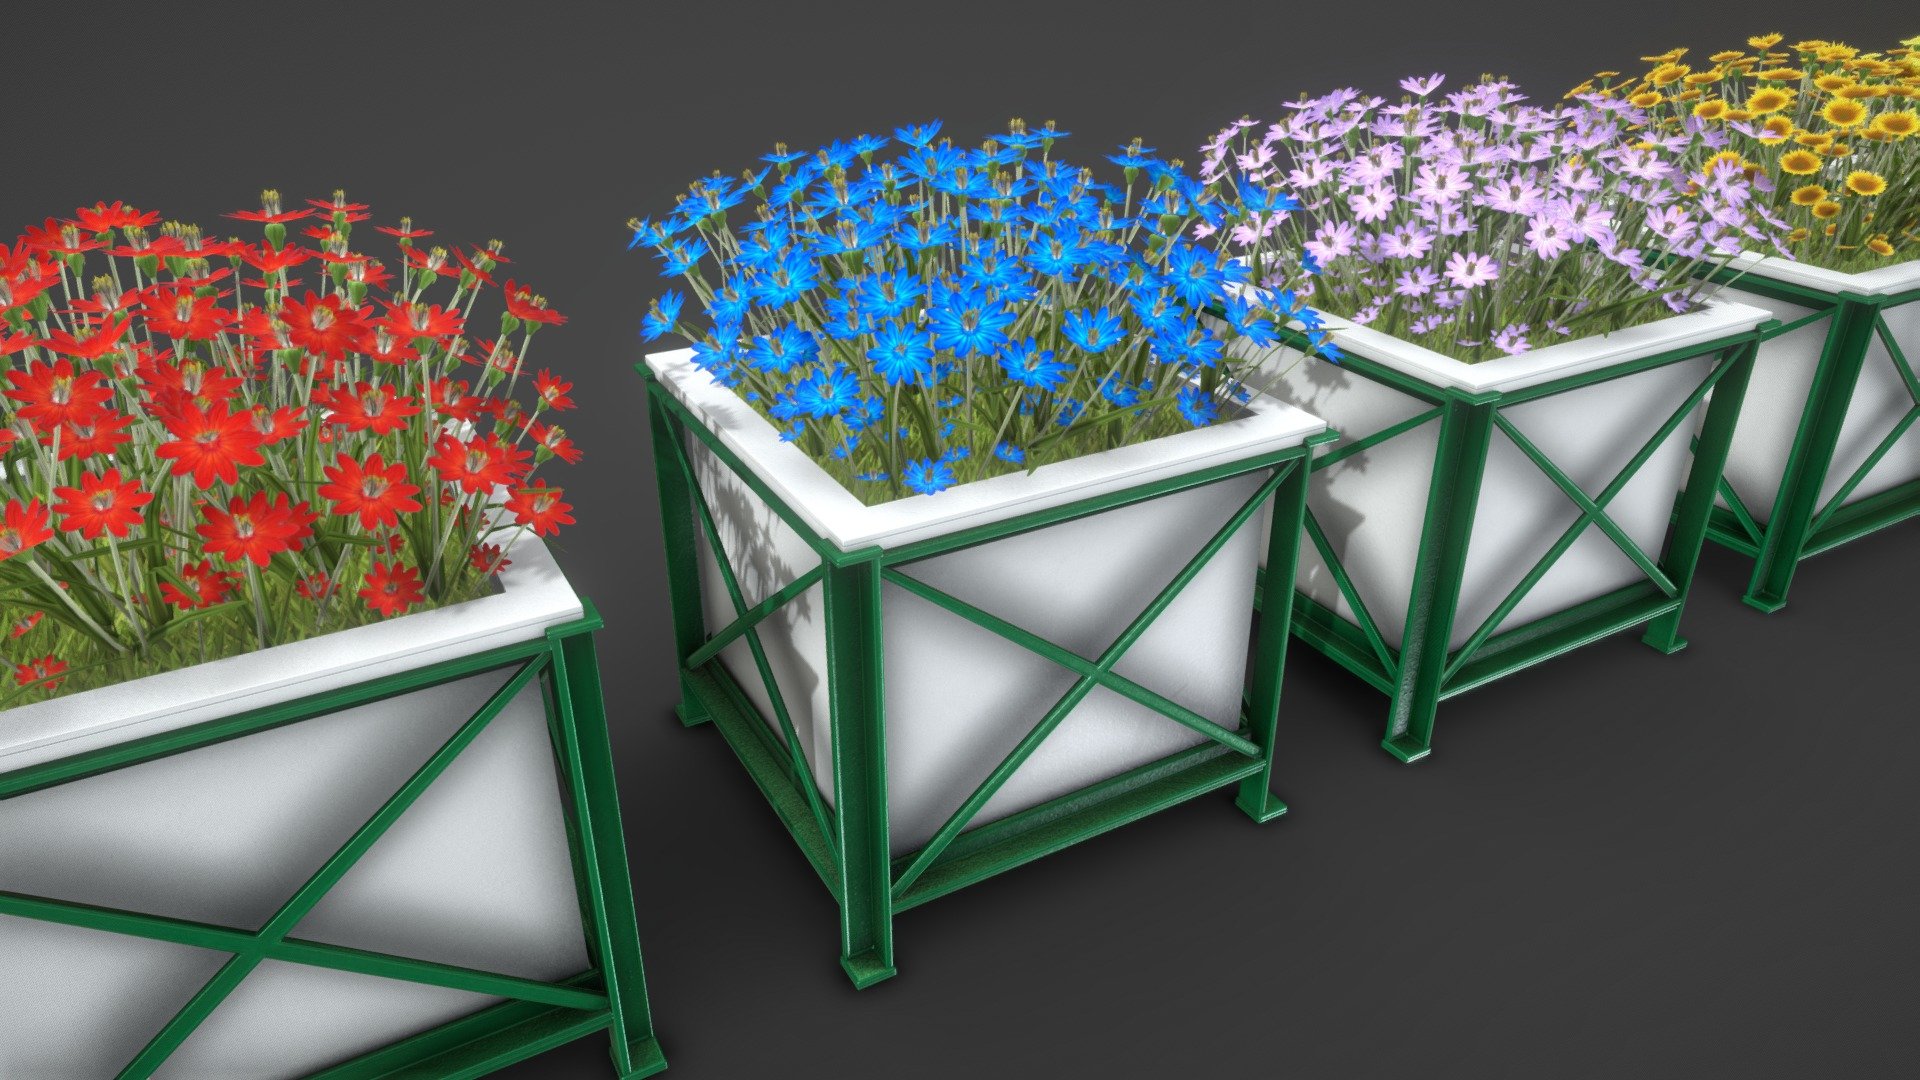 A revised version of the flower planter collection.




The flower planter is now pbr textured (4k).






Object Name - City Flower Pot Blue Flowers 

0.904m x 0.905m x 1.005m

Polygons = 6491






Object Name - City Flower Pot Red Flowers 

0.904m x 0.905m x 1.005m

Polygons = 6491






Object Name - City Flower Pot Sunflowers 

0.904m x 0.905m x 1.025m

Polygons = 5687






Object Name - City Flower Pot Violet Flowers 

0.904m x 0.905m x 1.005m

Polygons = 6491






Object Name - City Flower Pot White Flowers 

0.904m x 0.905m x 1.005m

Polygons = 6491






Object Name - City Flower Pot Yellow Flowers 

0.904m x 0.905m x 1.005m

Polygons = 5699






Object Name - Flower Planter  

0.744m x 0.744m x 0.656m

Polygons = 1920






old version



3d-modelled and textured by 3DHaupt in Blender-3D - Flower Planters Version 2 - Buy Royalty Free 3D model by VIS-All-3D (@VIS-All) 3d model